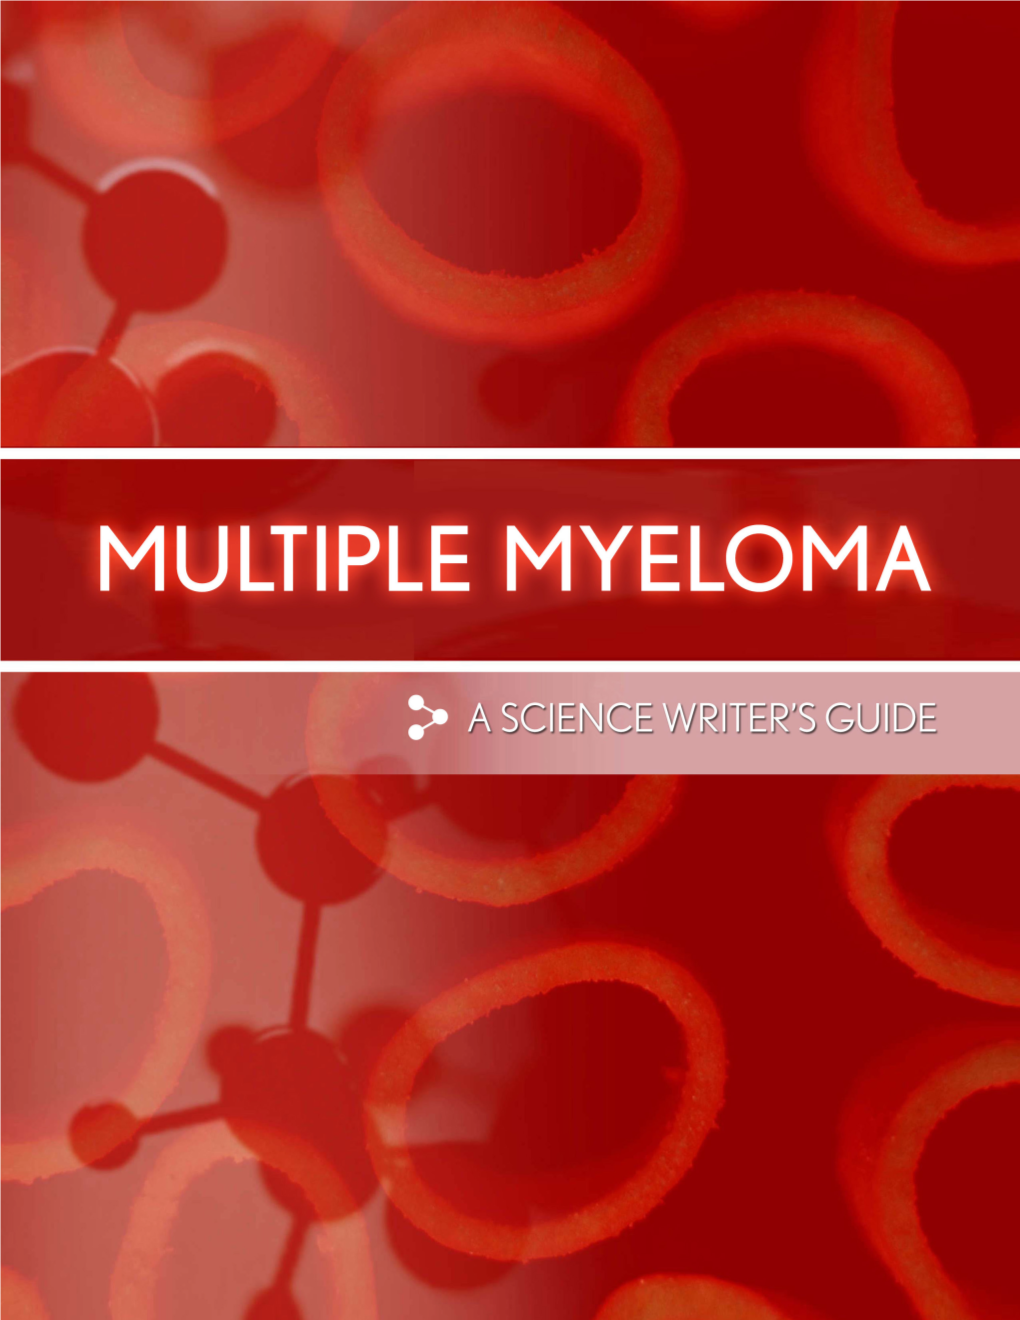 A Science Writer's Guide to Multiple Myeloma